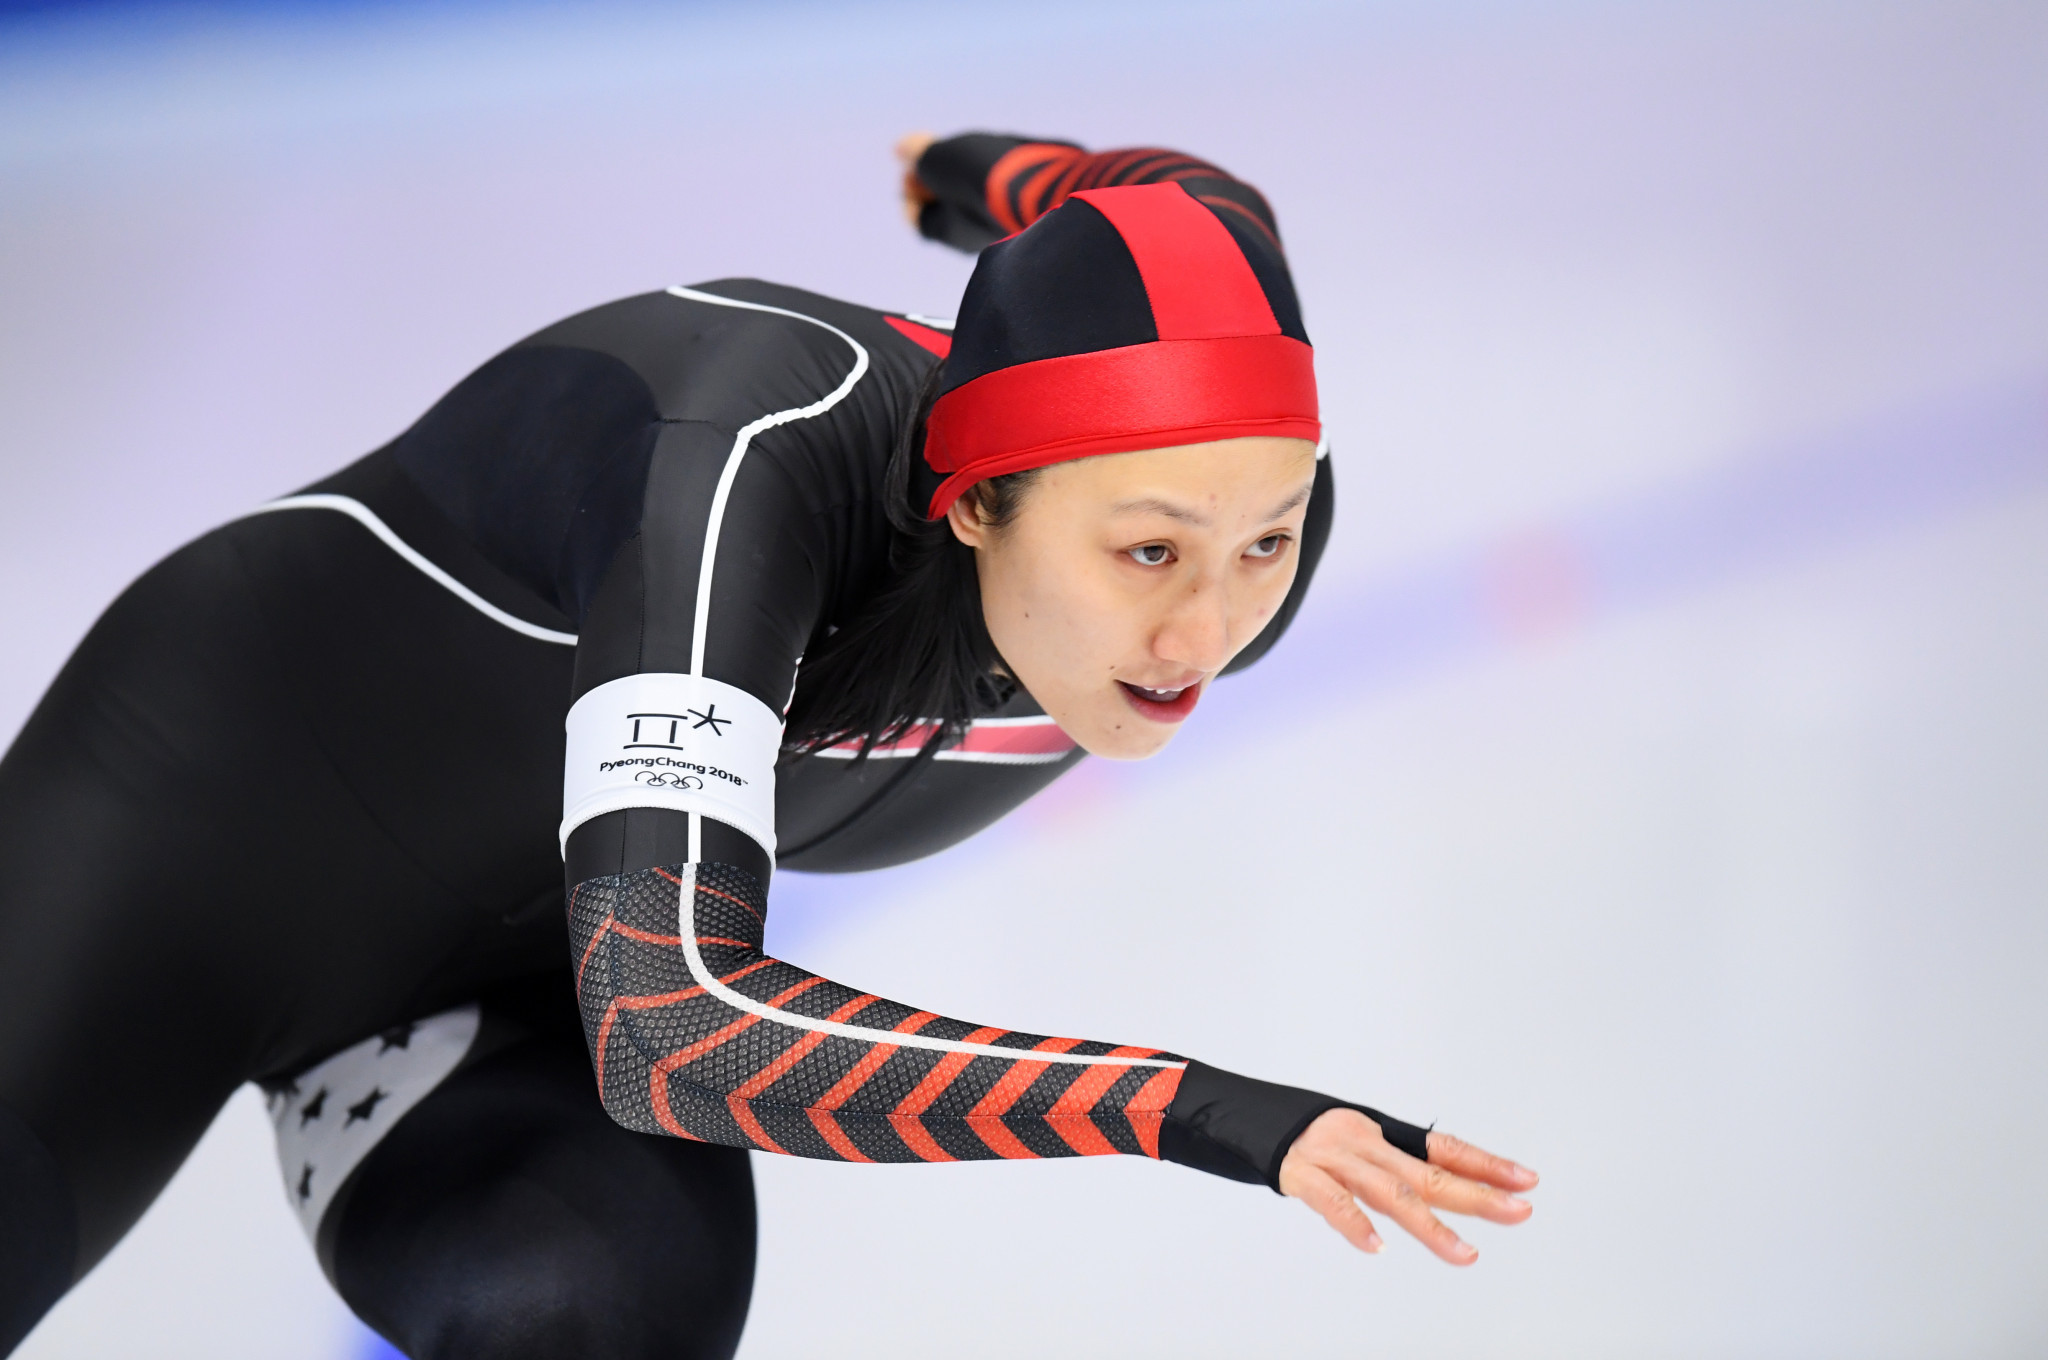 Chinese speed skater elected onto IOC Athletes' Commission as Coventry confirmed as Executive Board member